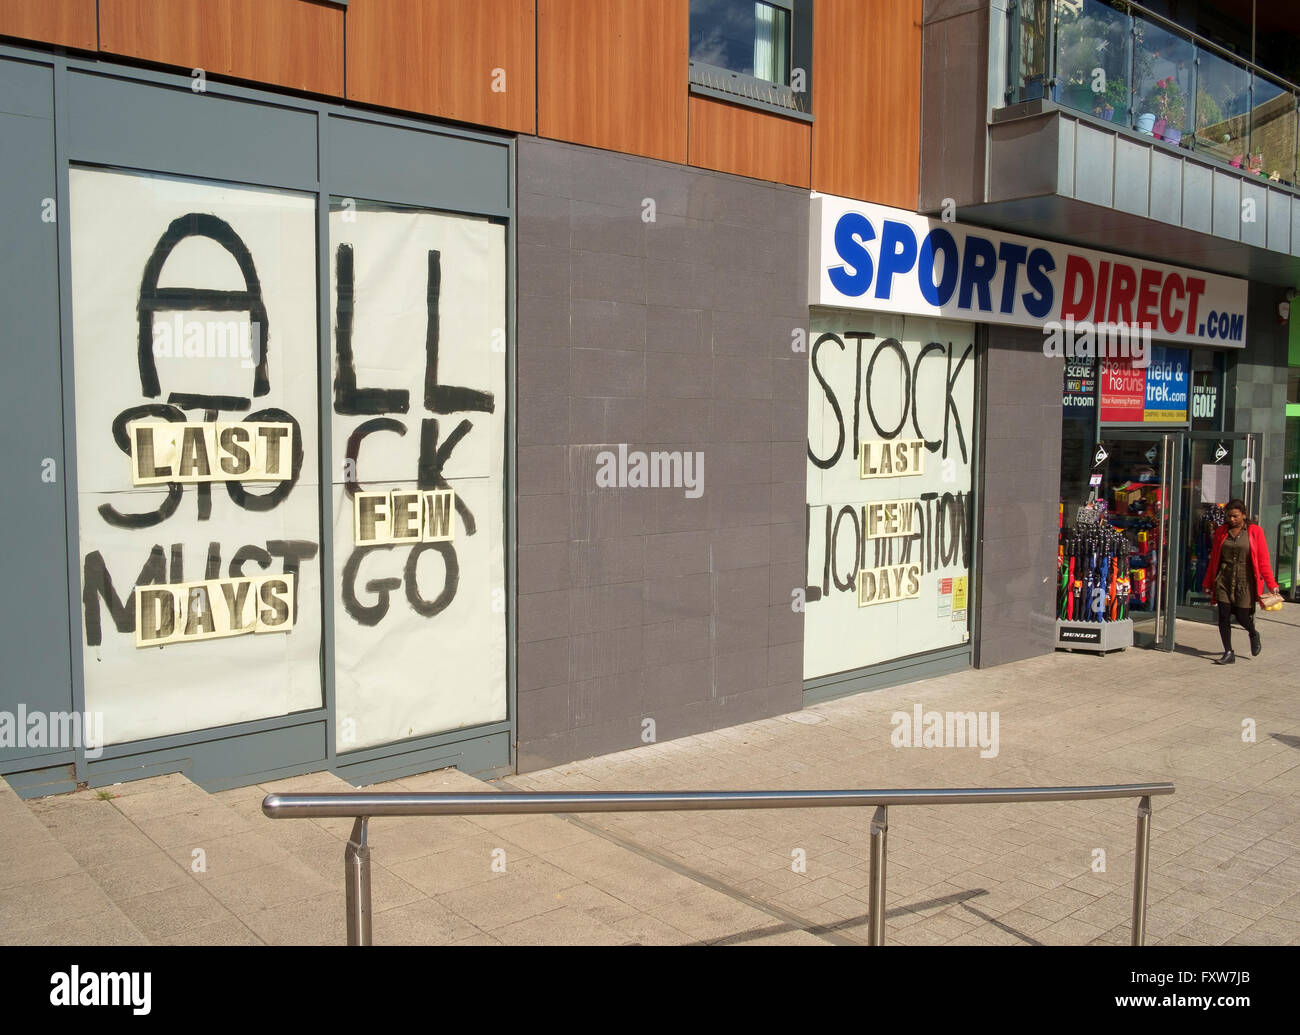 Sports Direct store in Redhill, Surrey with promotional posters giving impression of store closing Stock Photo